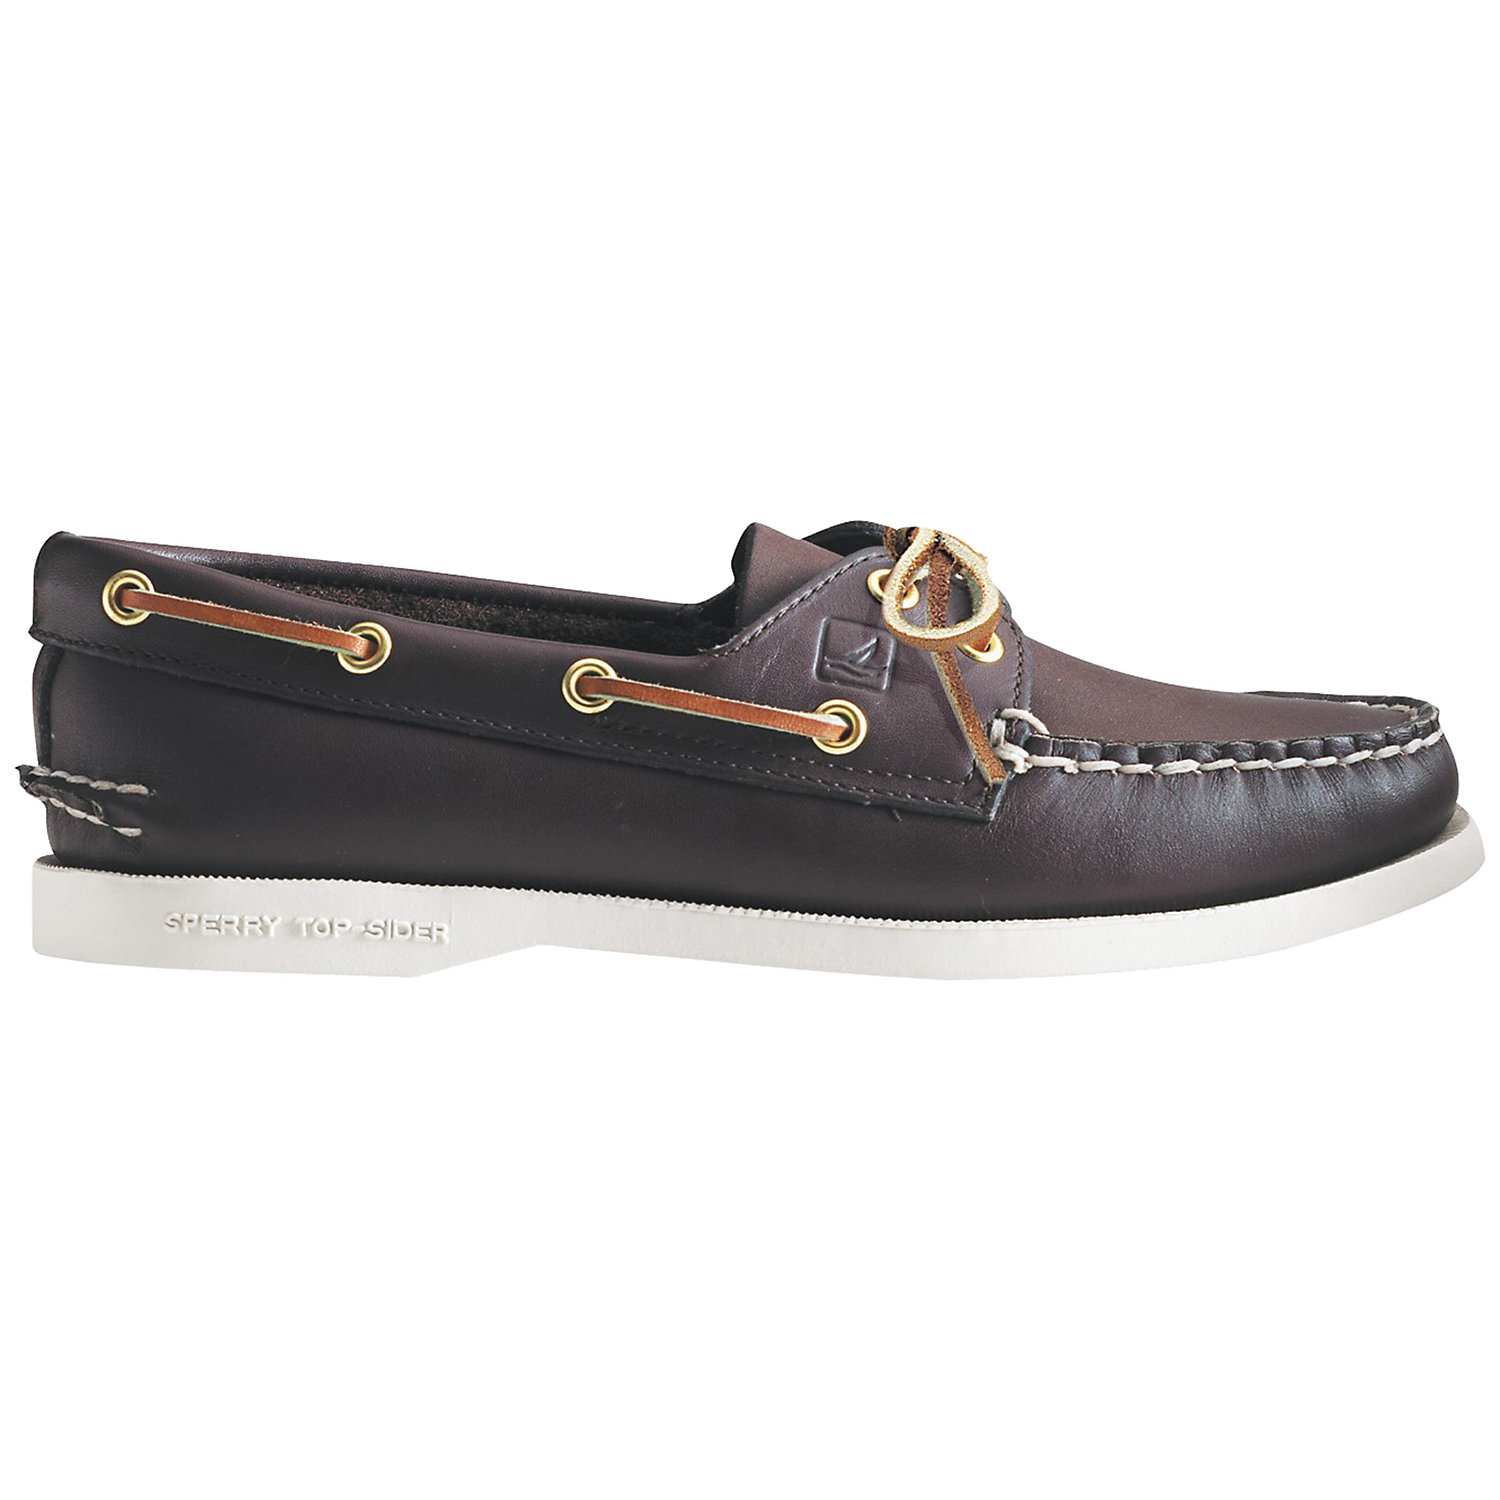 Sperry Womens Authentic Original 2-Eye Boat Shoe